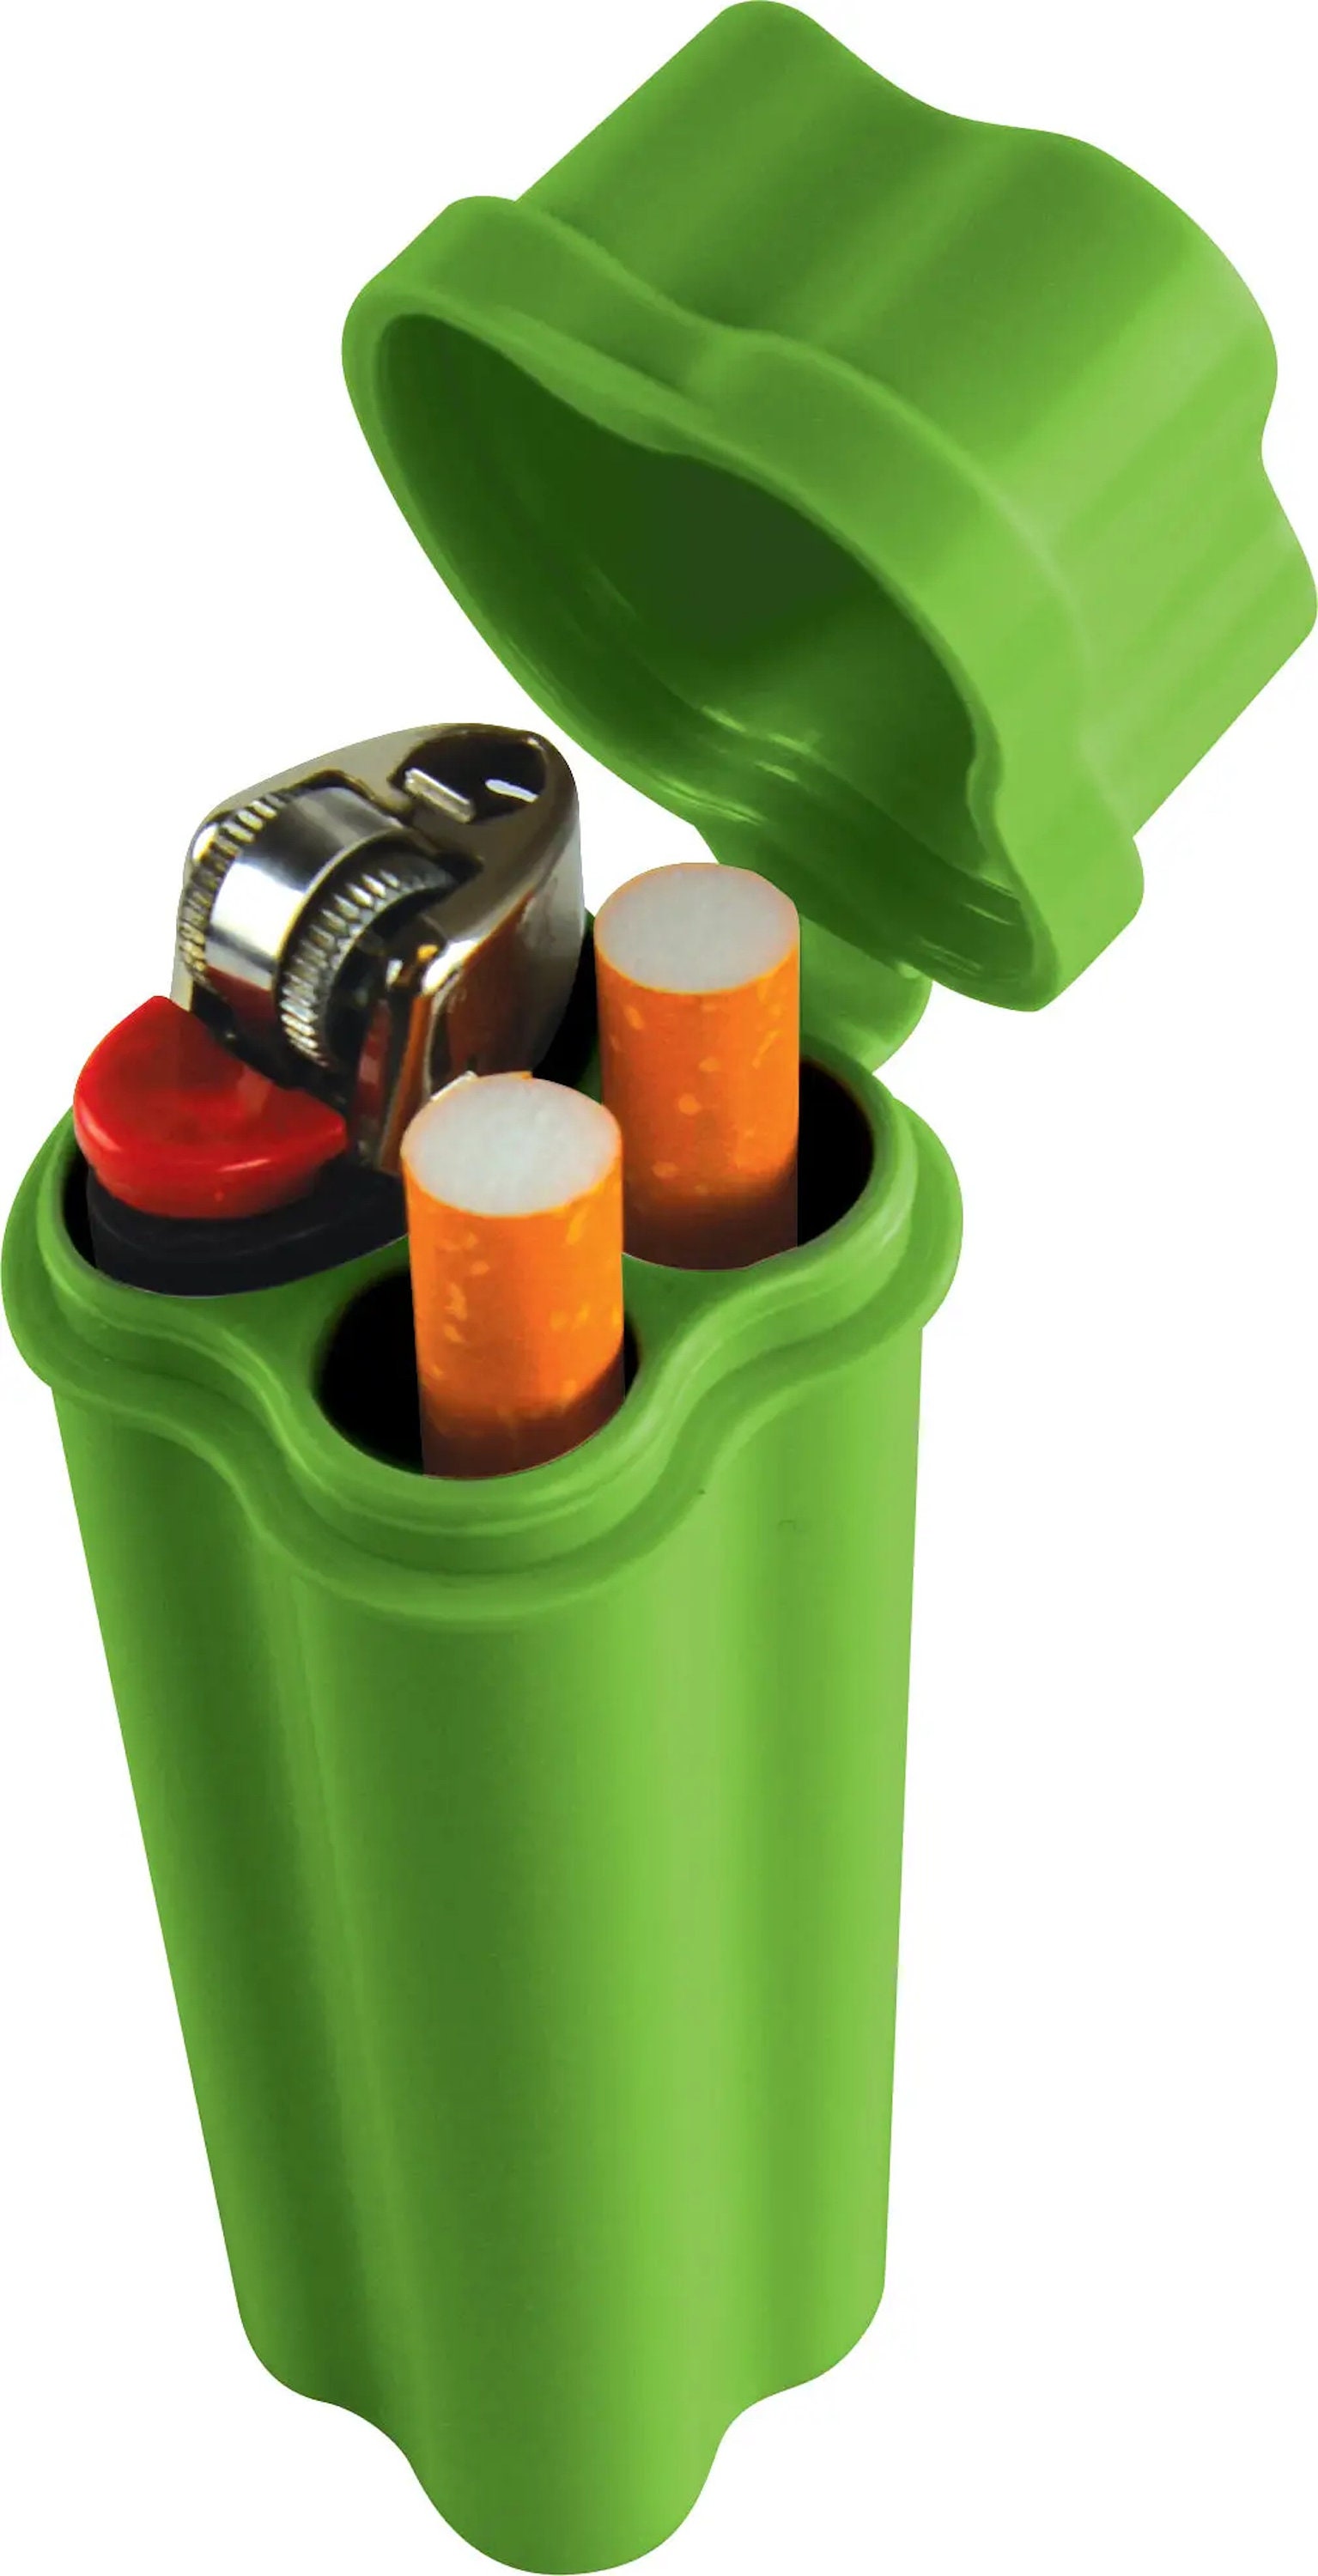 Aluminum Joint Holder | Pill Container | Smell-Proof & Water Proof, Fits  King-Size Papers